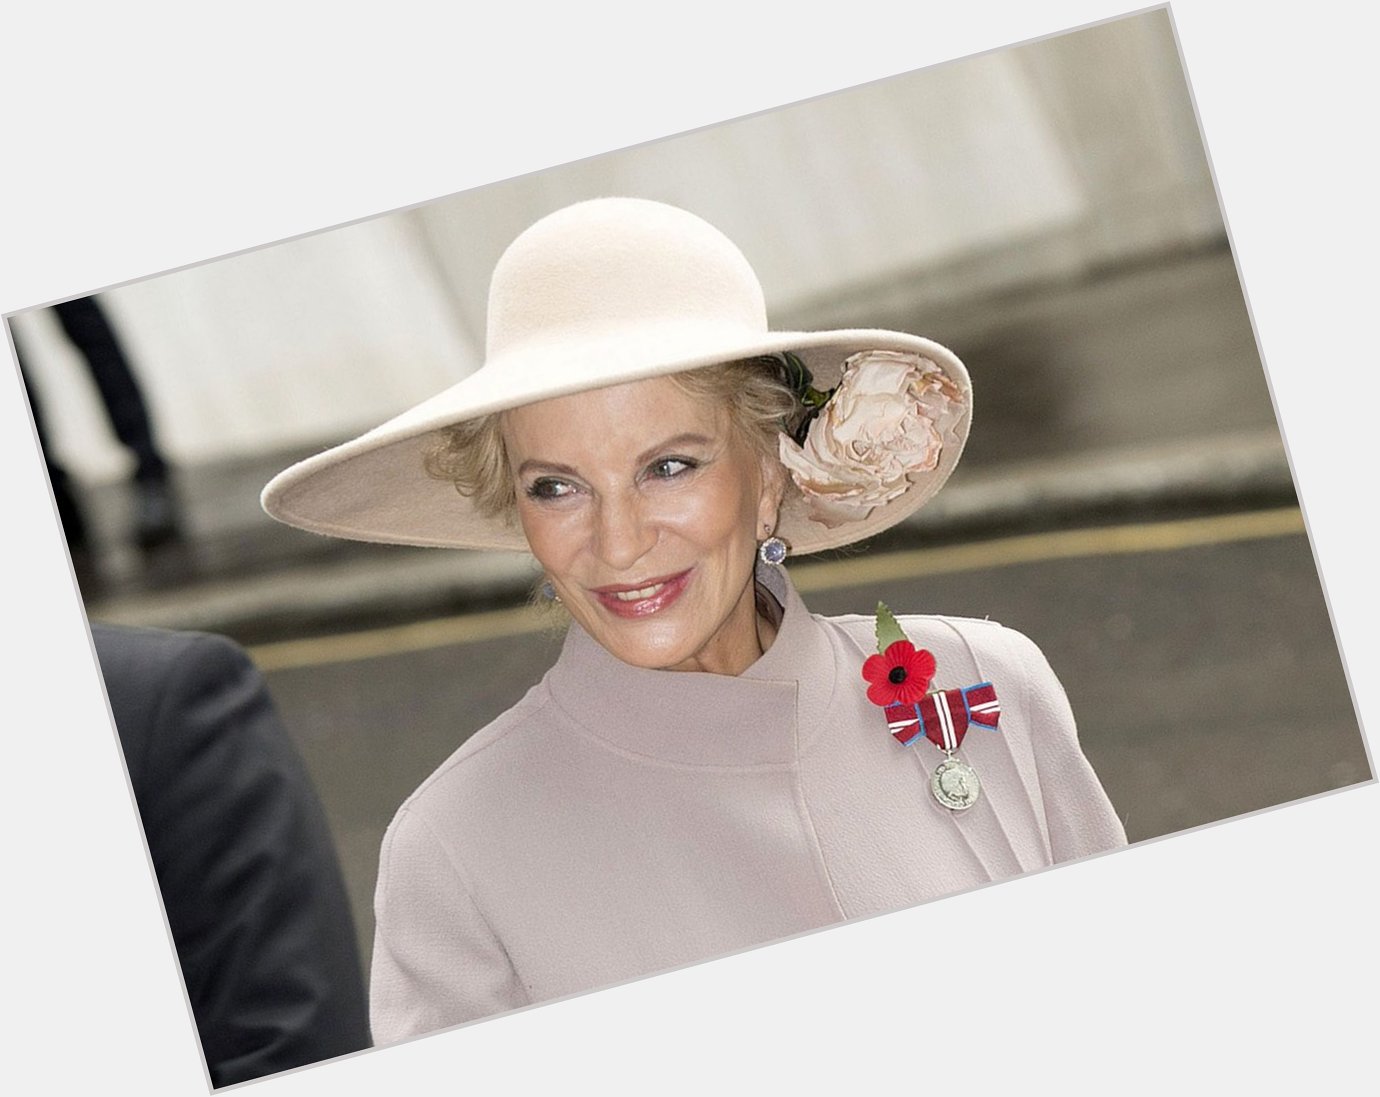 A happy 70th birthday to Princess Michael of Kent. 